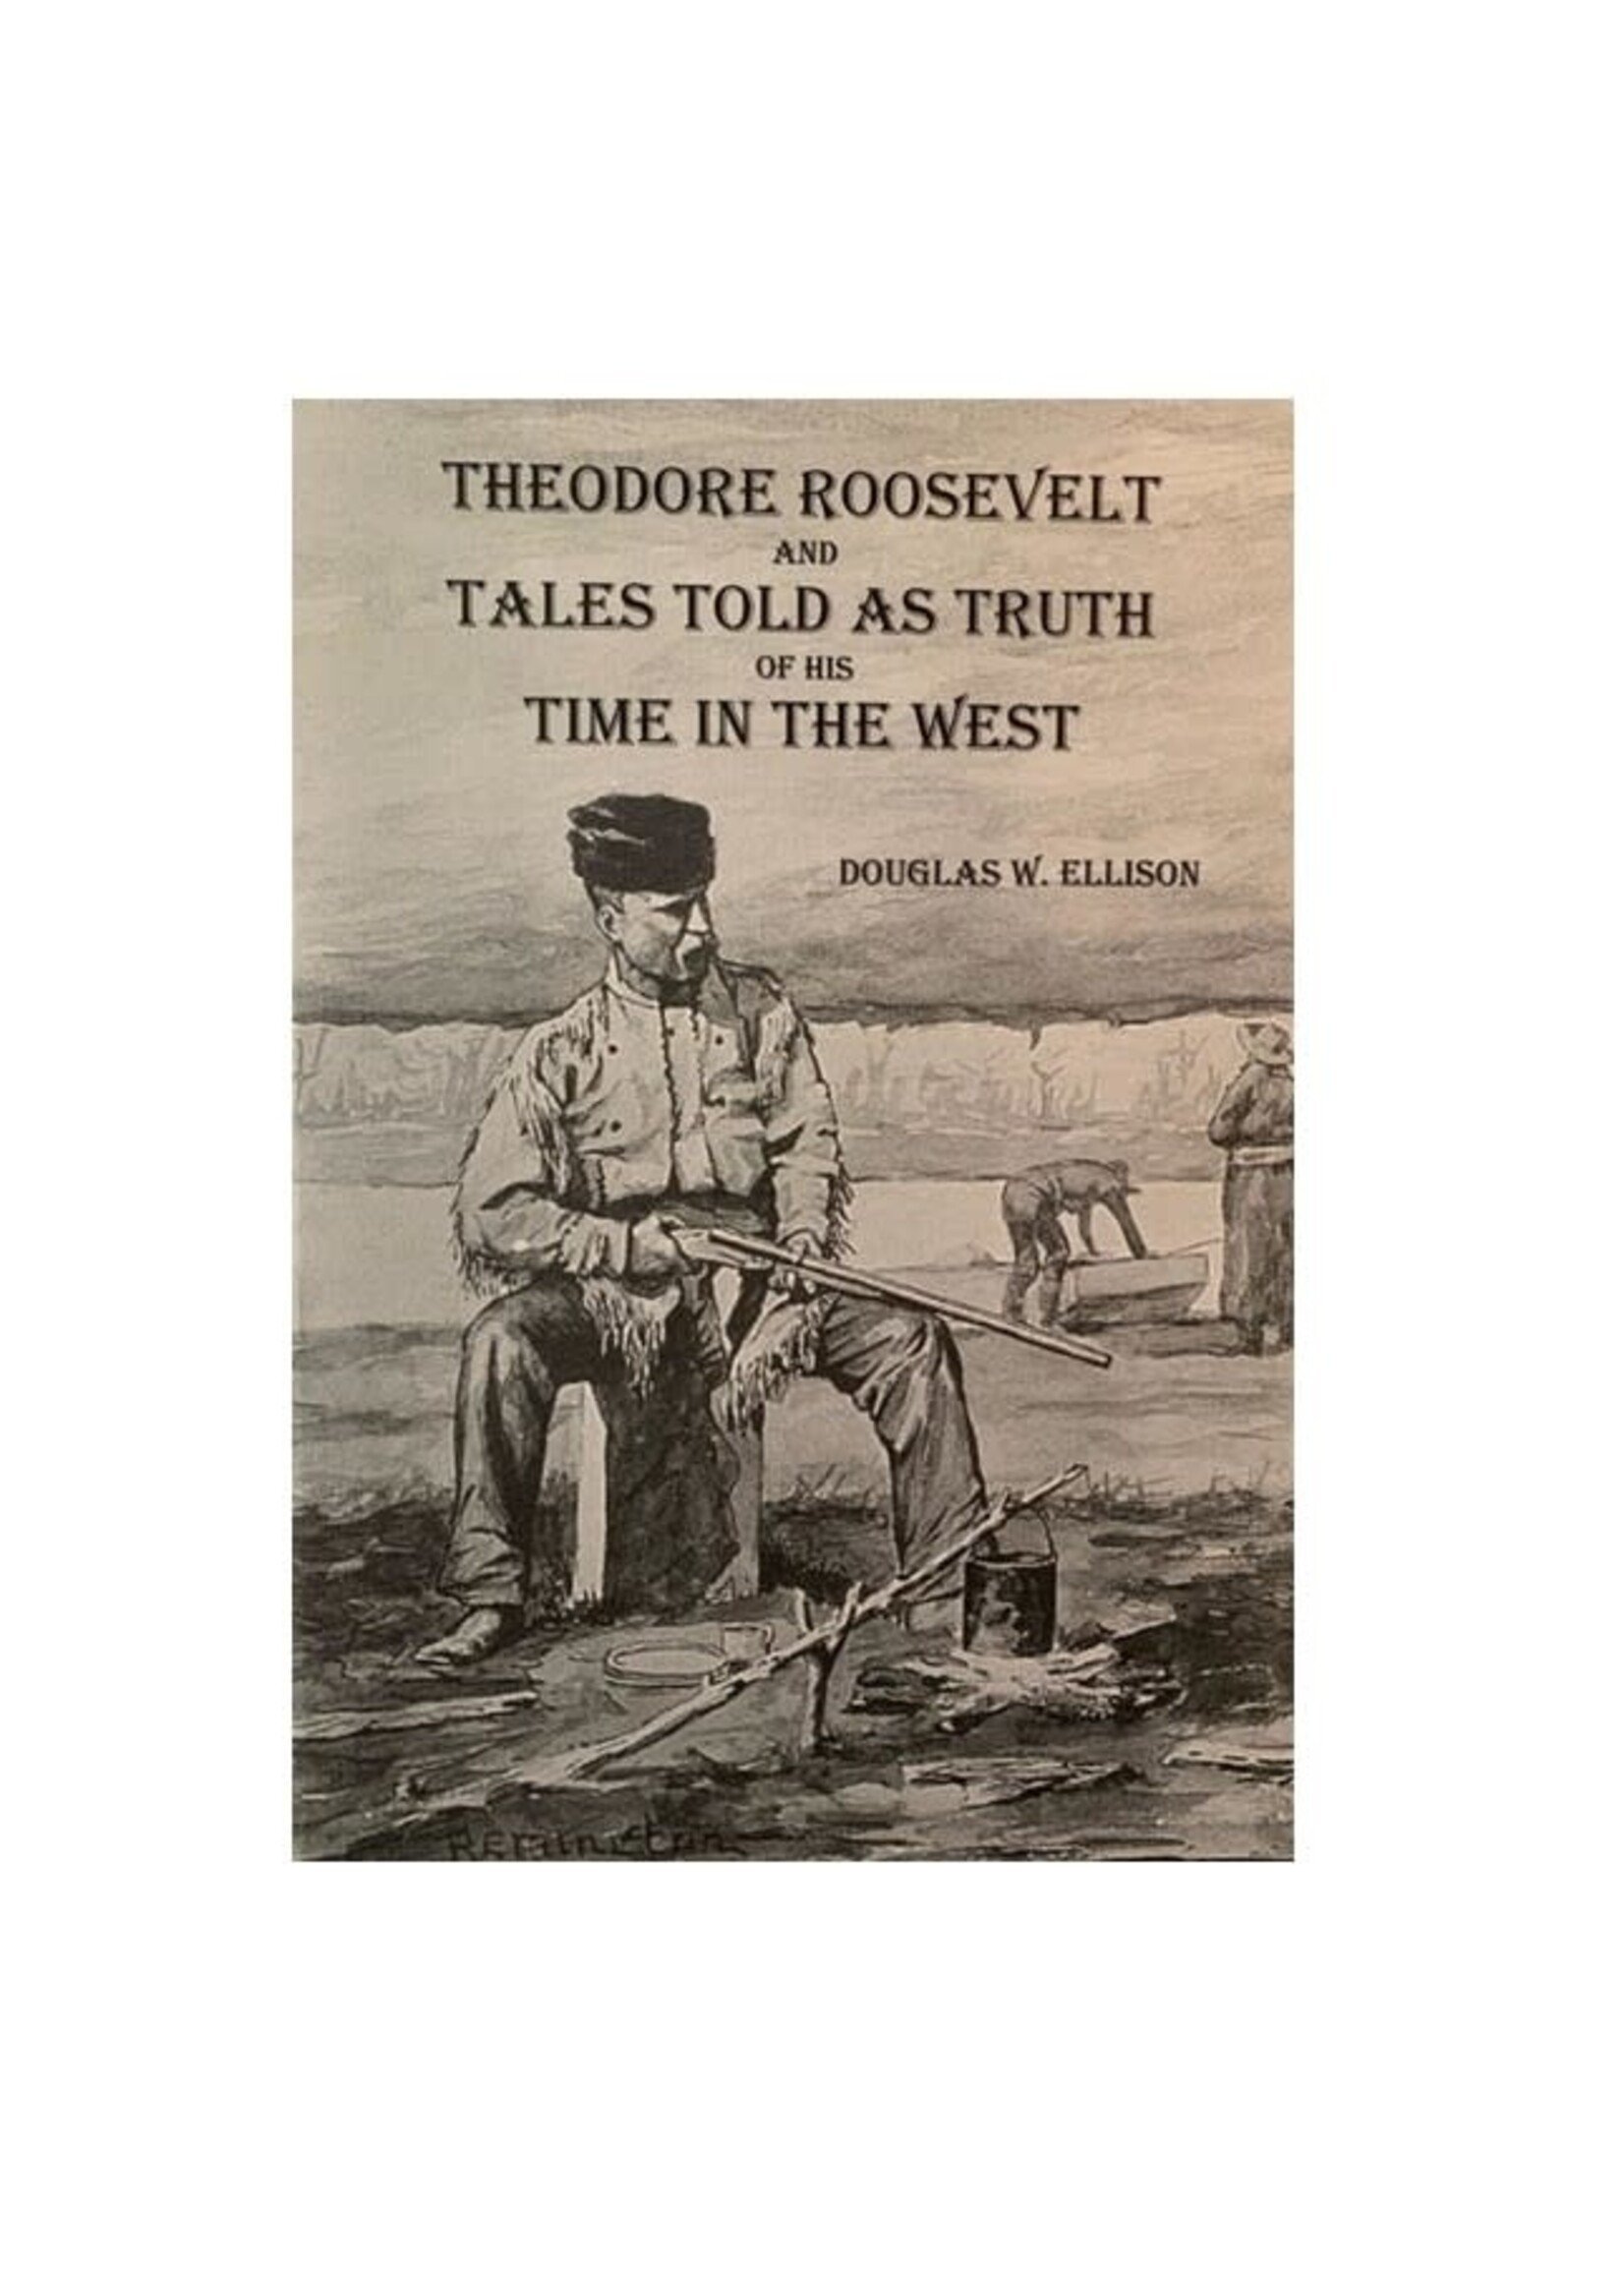 Theodore Roosevelt and Tales Told as Truth of His Time in the West